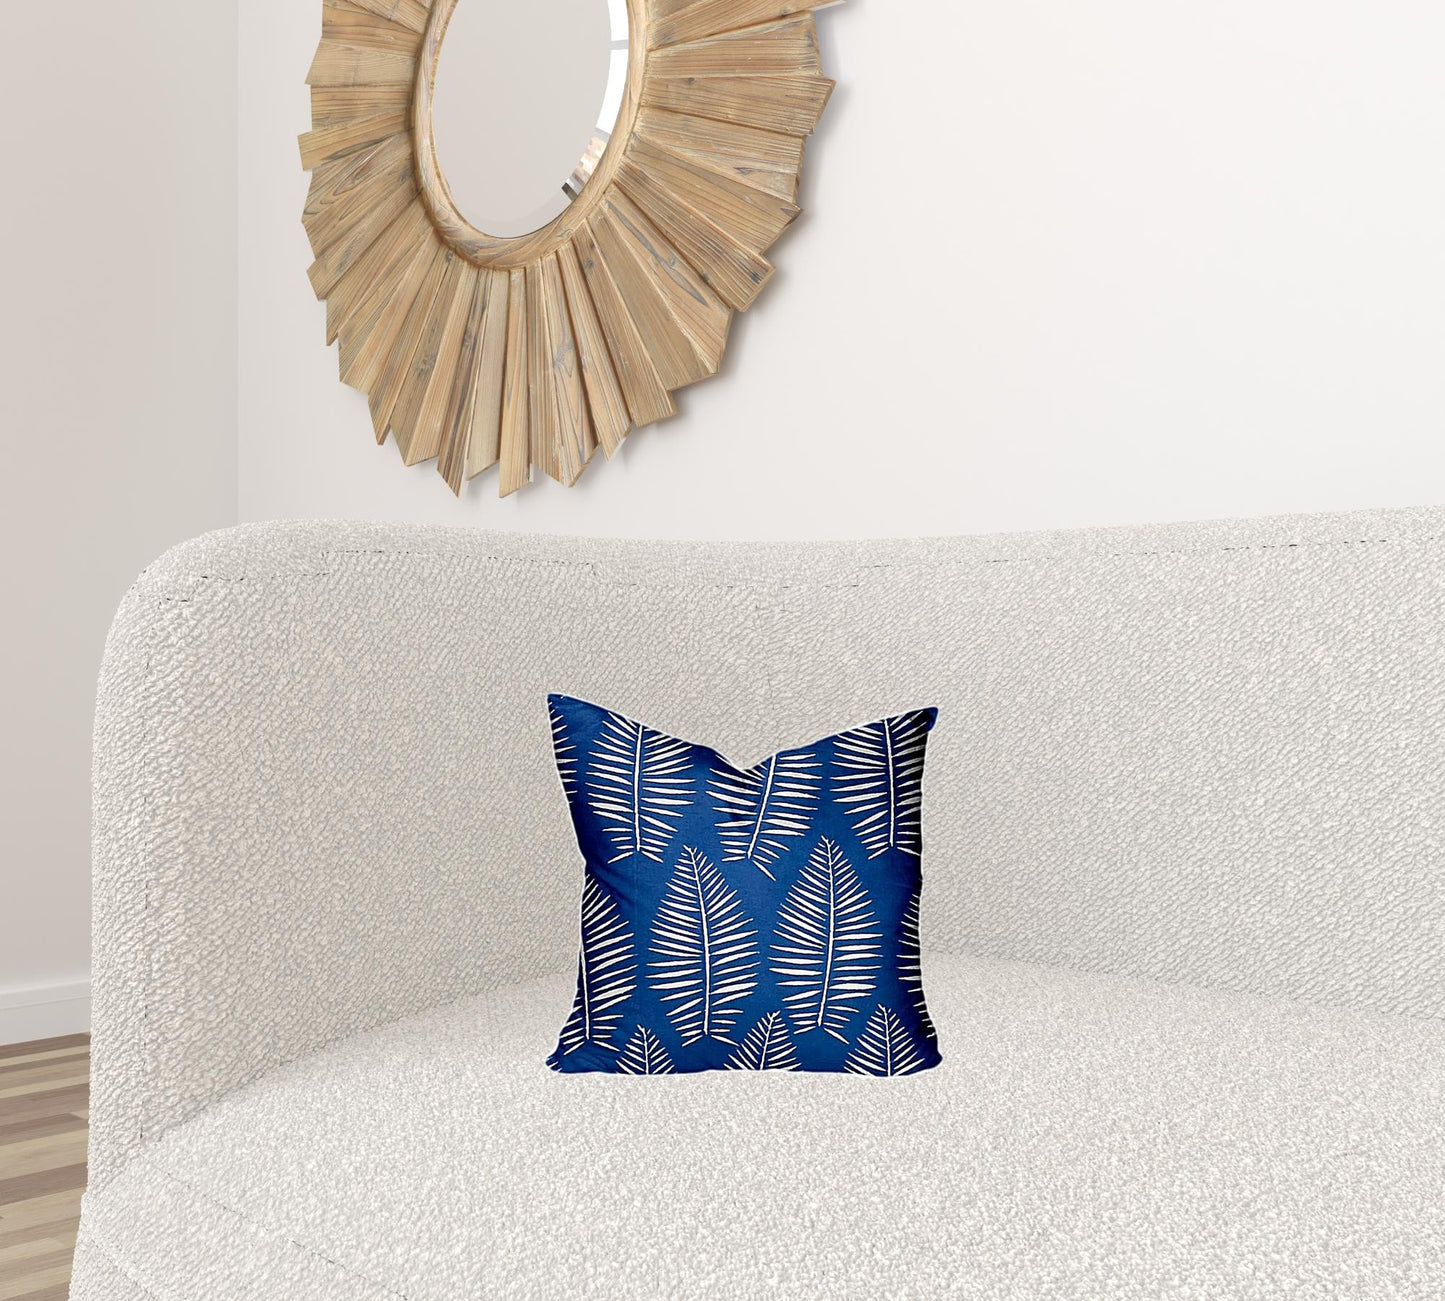 14" X 14" Blue And White Enveloped Tropical Throw Indoor Outdoor Pillow